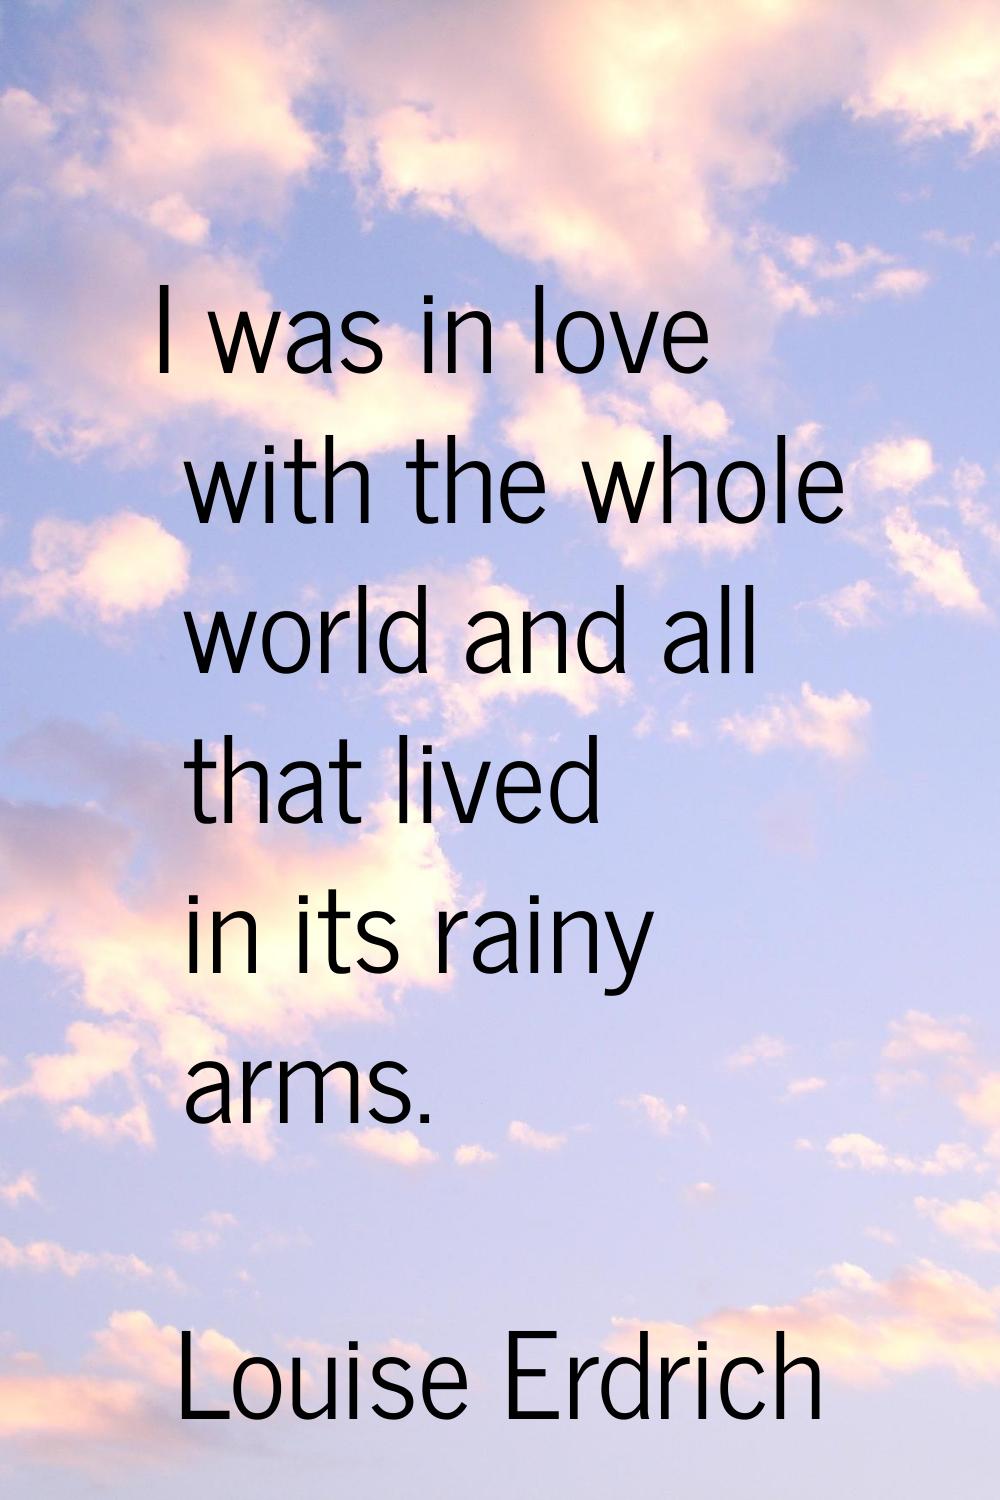 I was in love with the whole world and all that lived in its rainy arms.